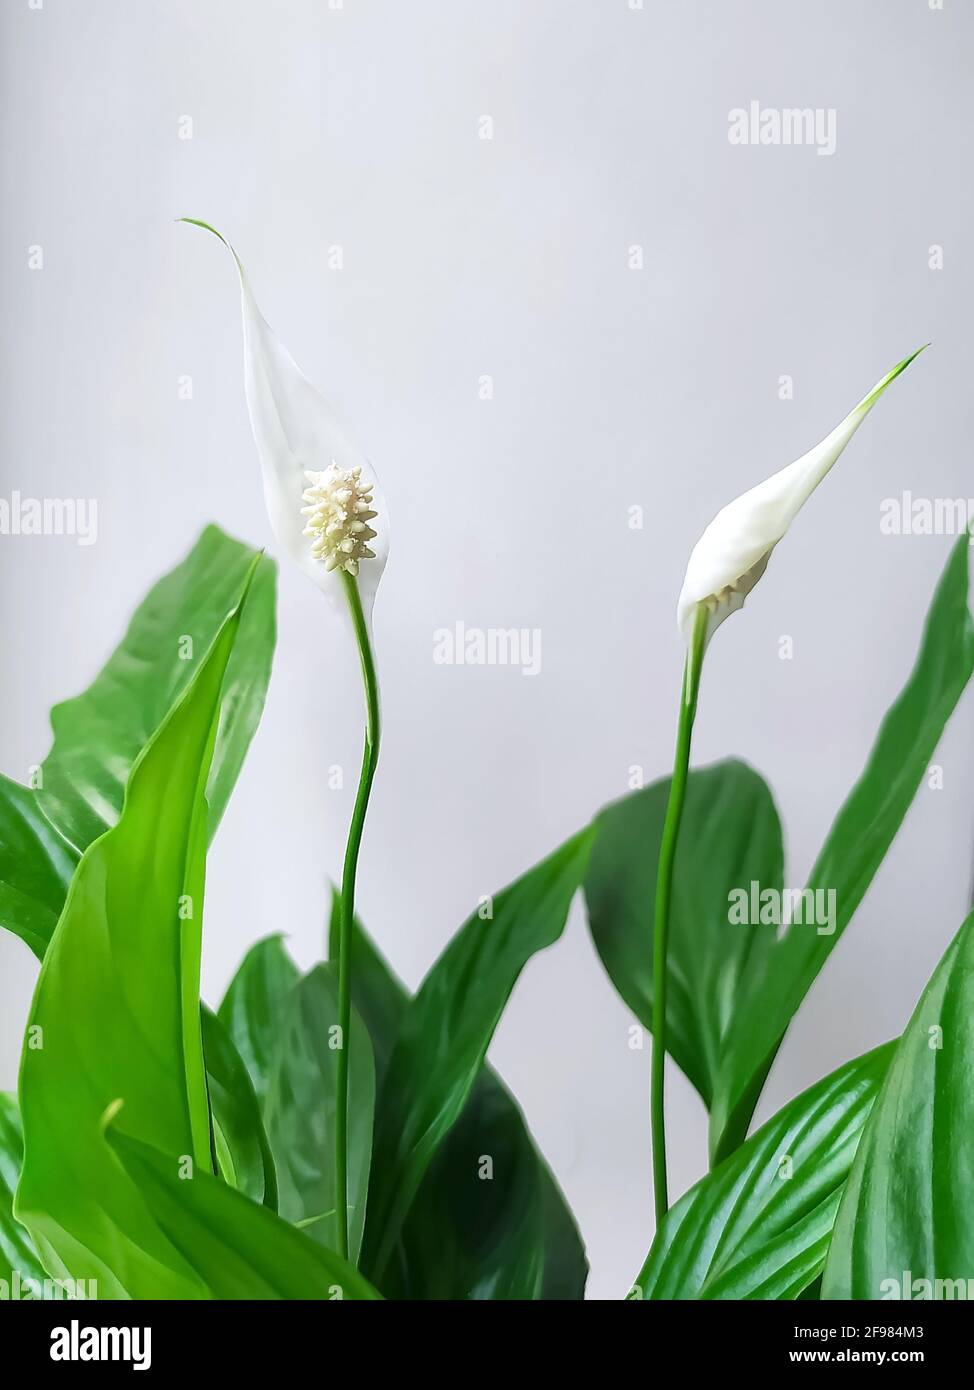 two spathiphyllum flowers with green leaves on a light background Stock Photo